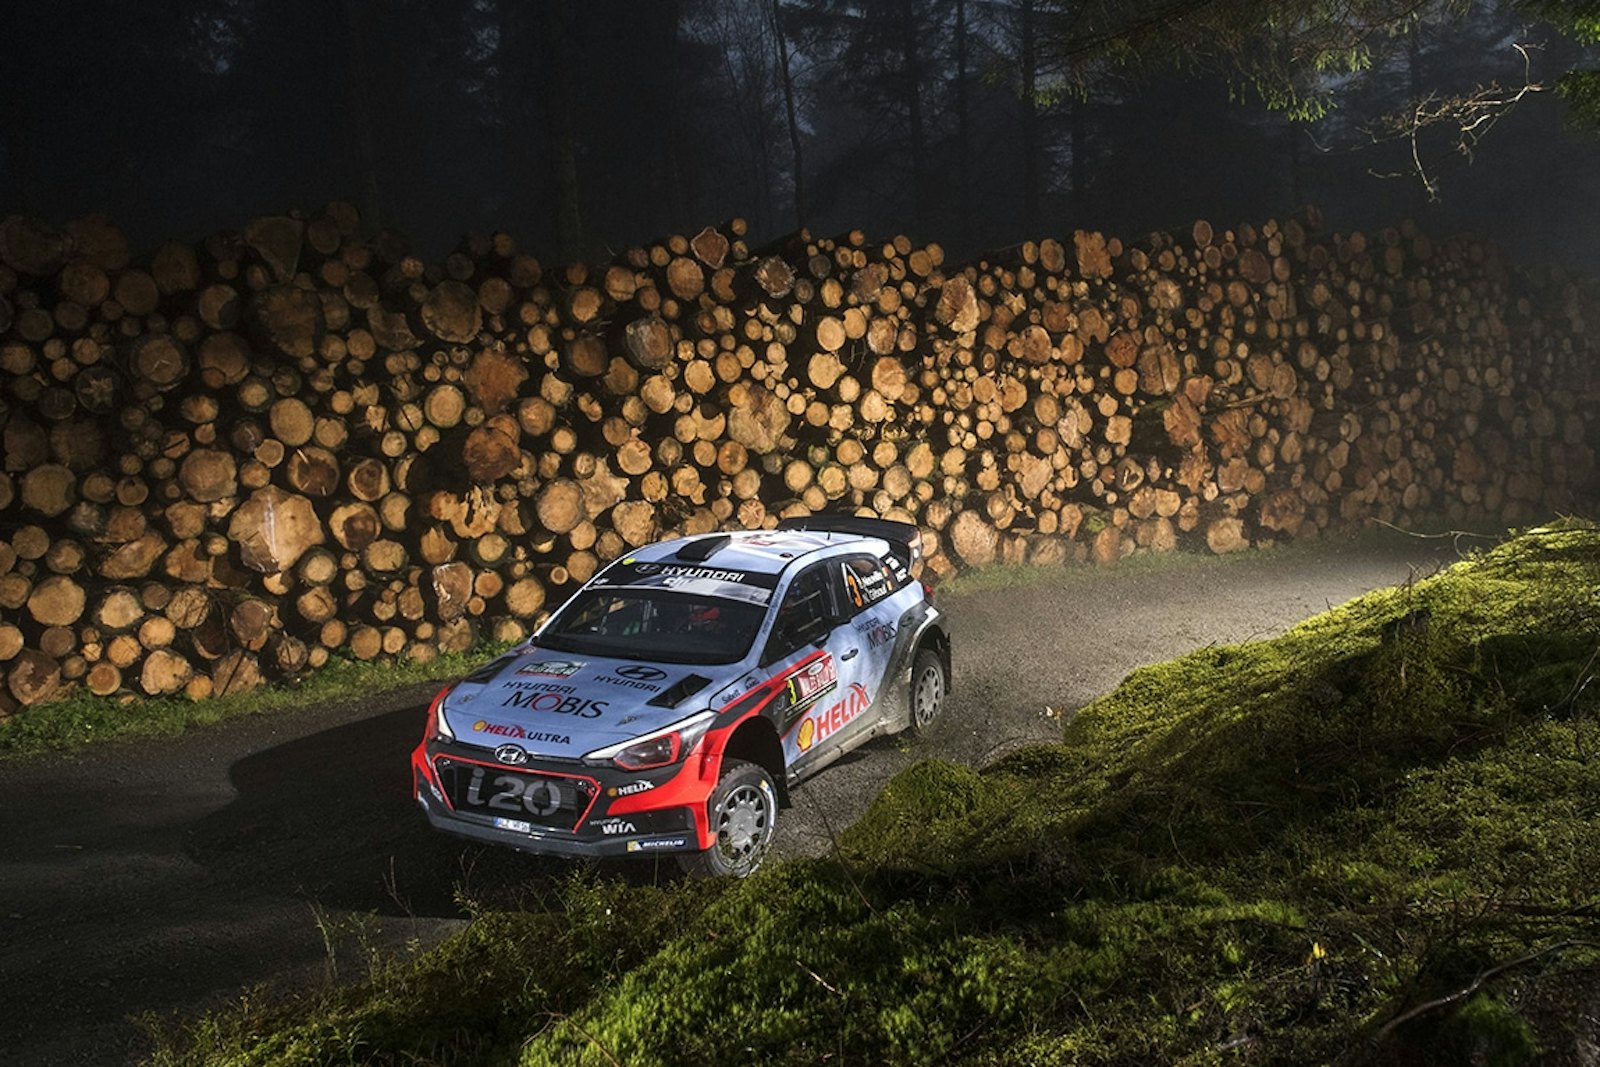 Thierry Neuville (BEL) performs during FIA World Rally Championship in Deeside, Great Britain on 30  October 2016 // Jaanus Ree/Red Bull Content Pool // P-20161029-01059 // Usage for editorial use only // Please go to www.redbullcontentpool.com for further information. //